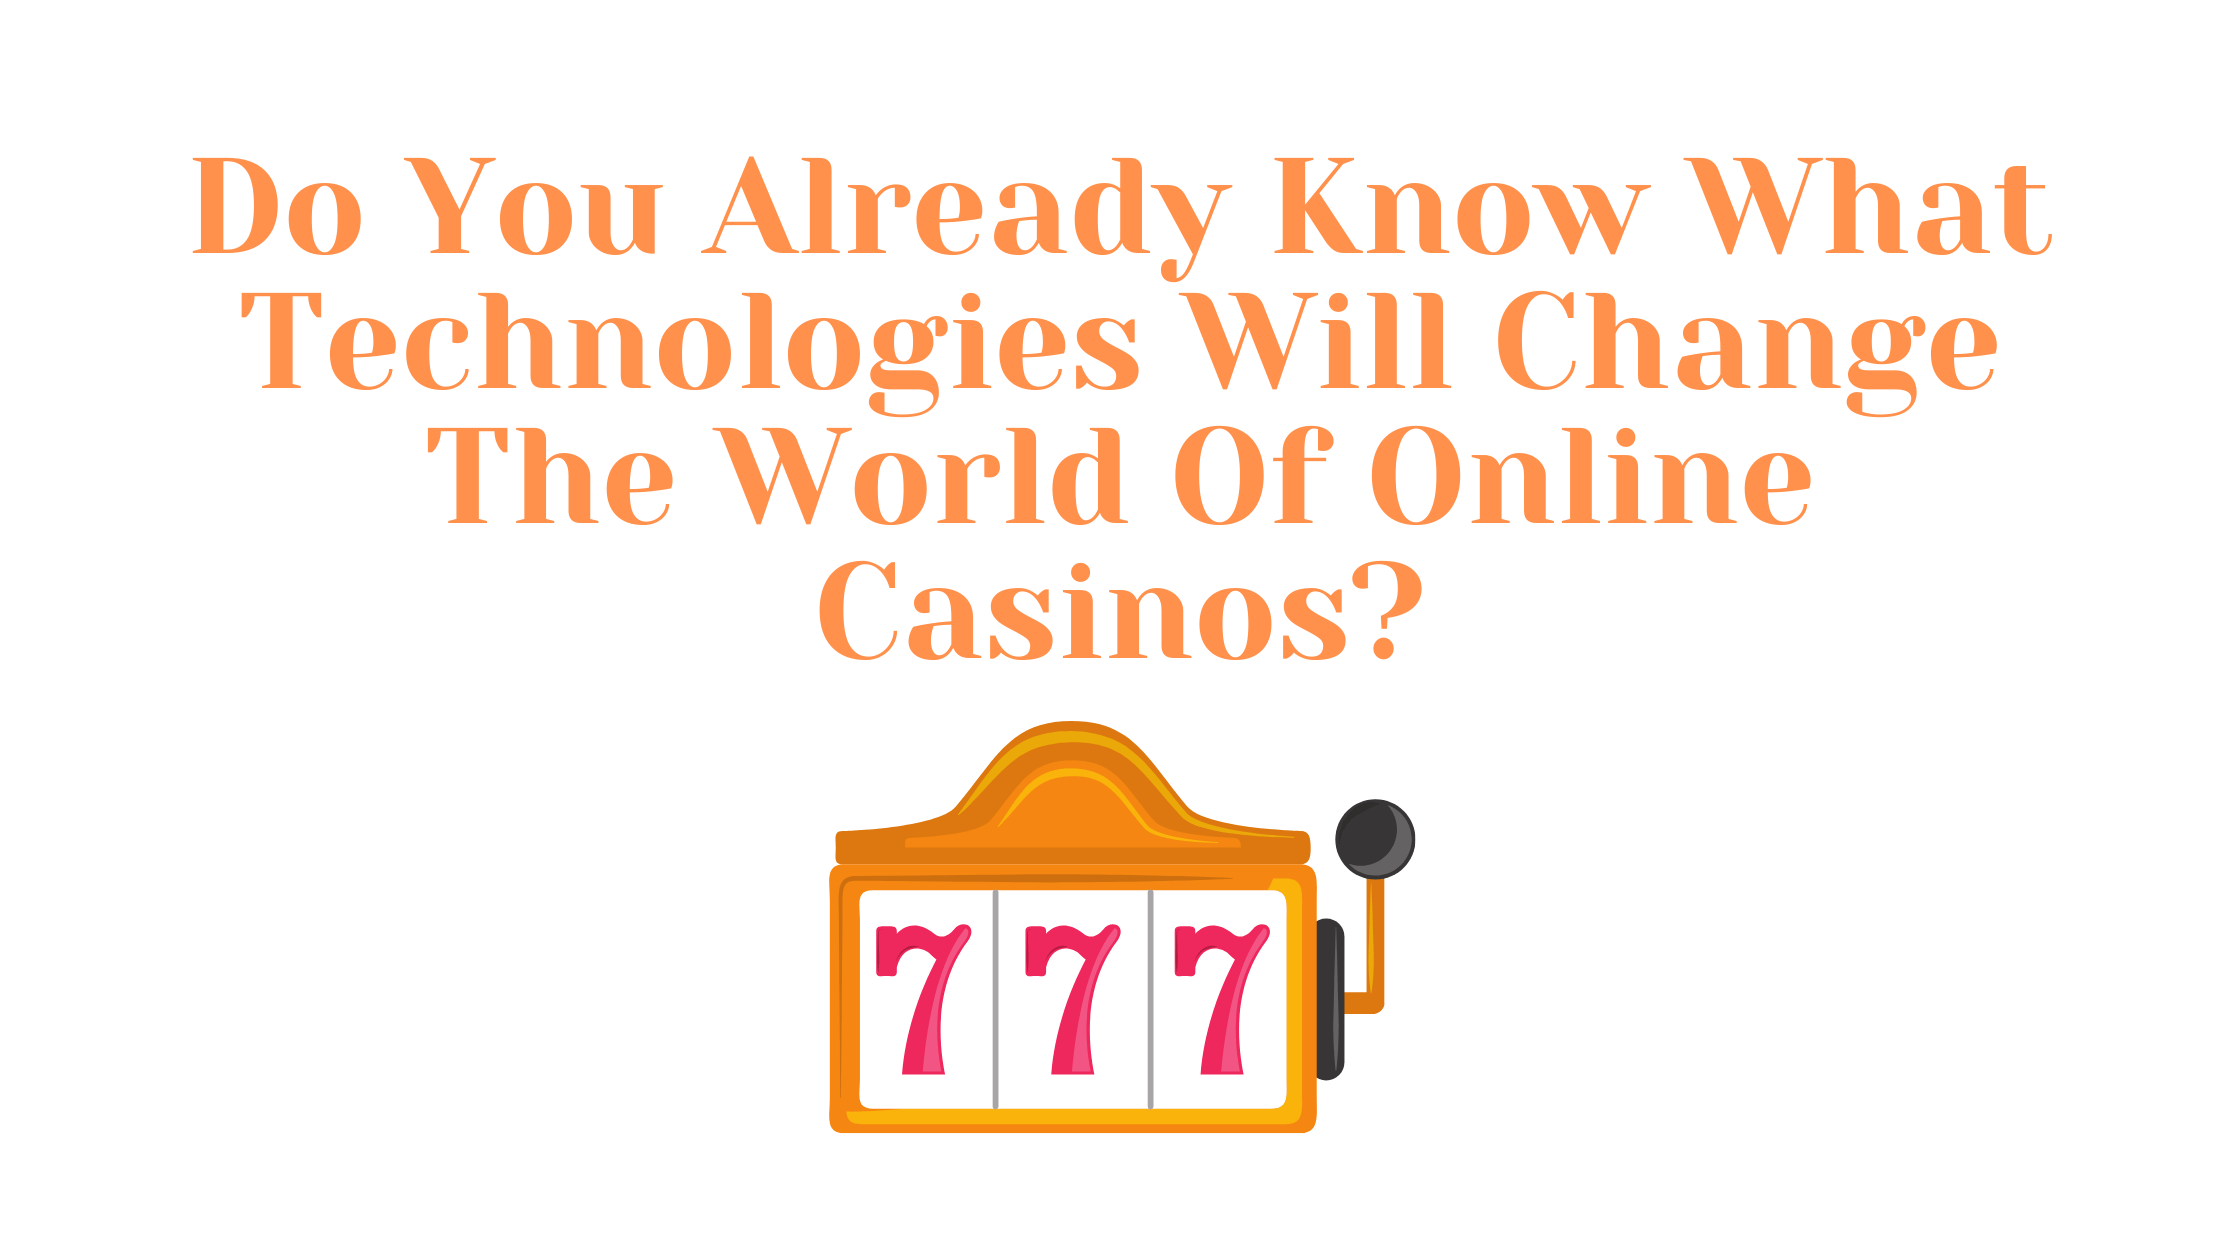 Do You Already Know What Technologies Will Change The World Of Online Casinos